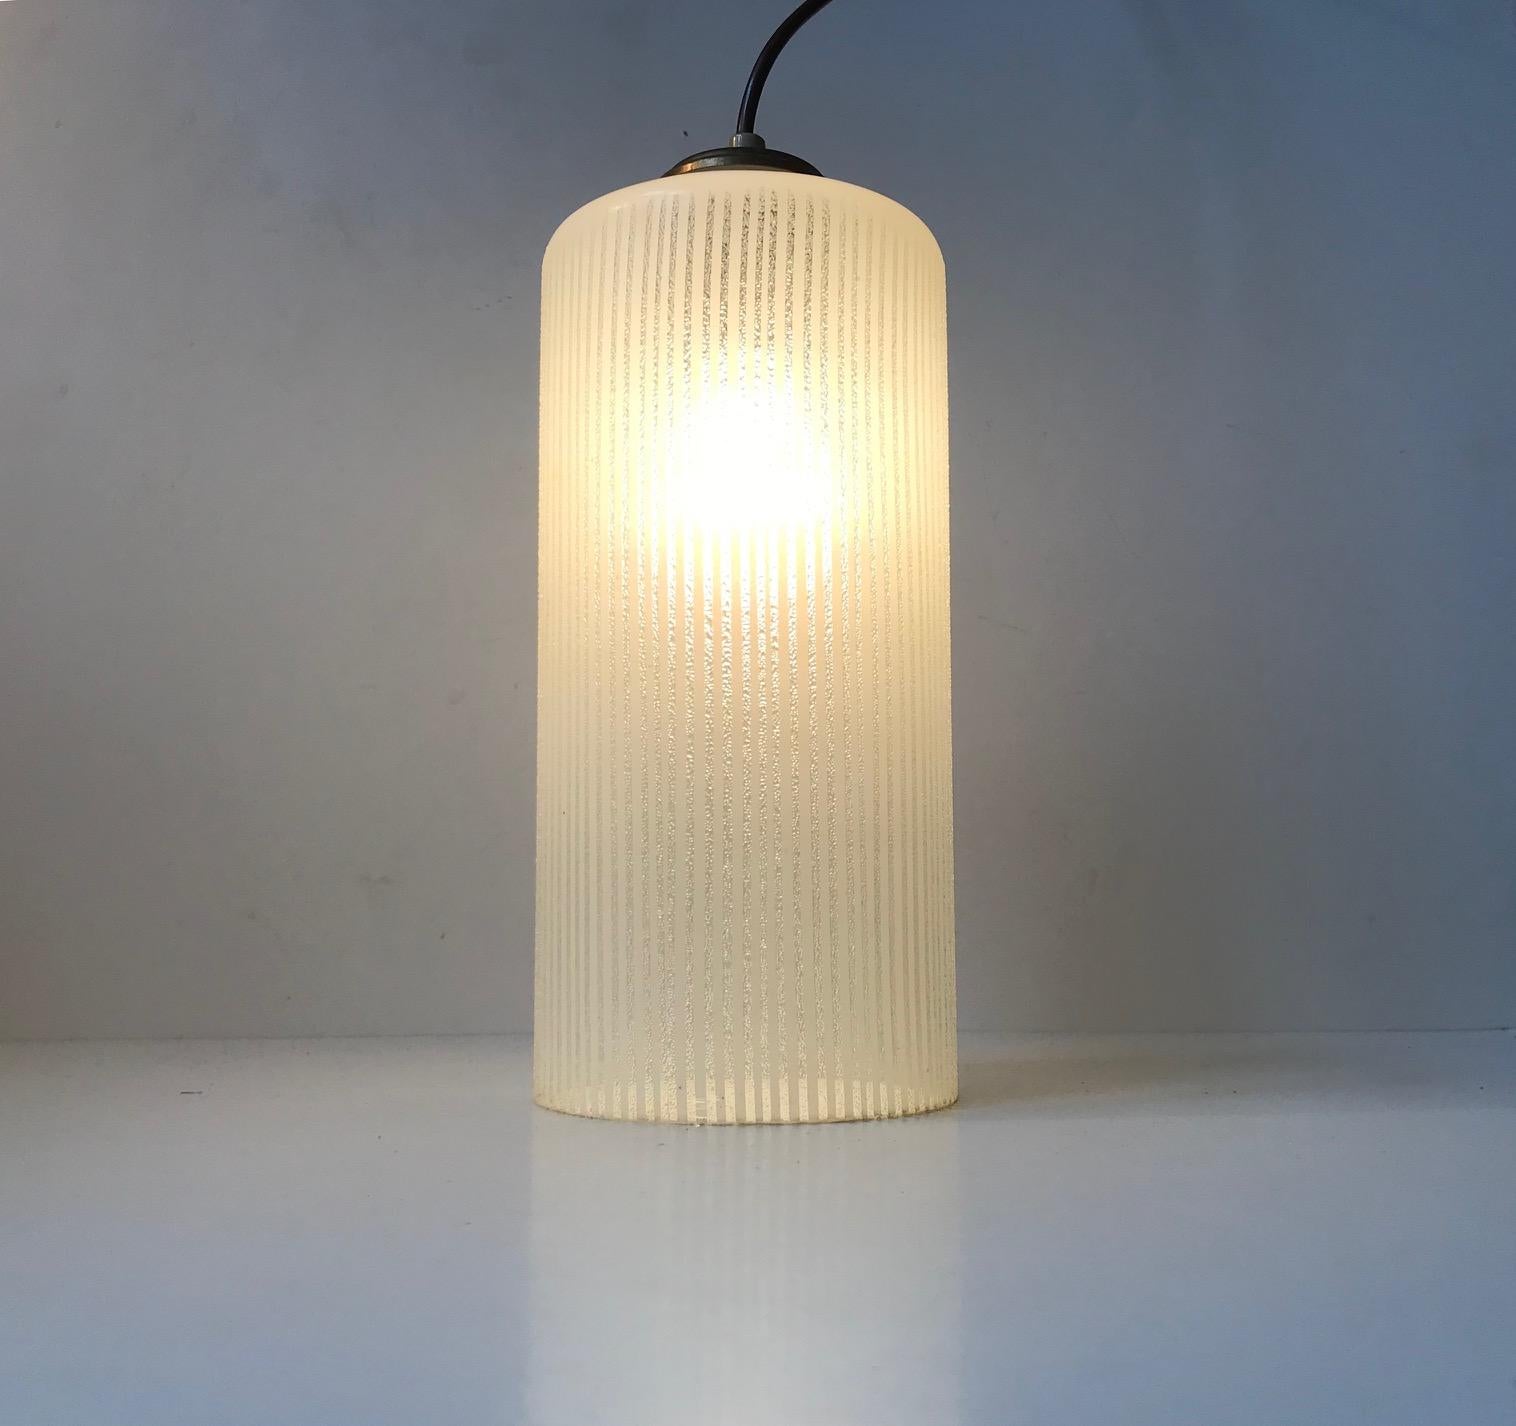 Cylindrical pin-striped pendant lamp. Made from partially frosted hand blown single layered glass. The top is made from brass. Manufactured by Voss in Denmark during the 1950s.